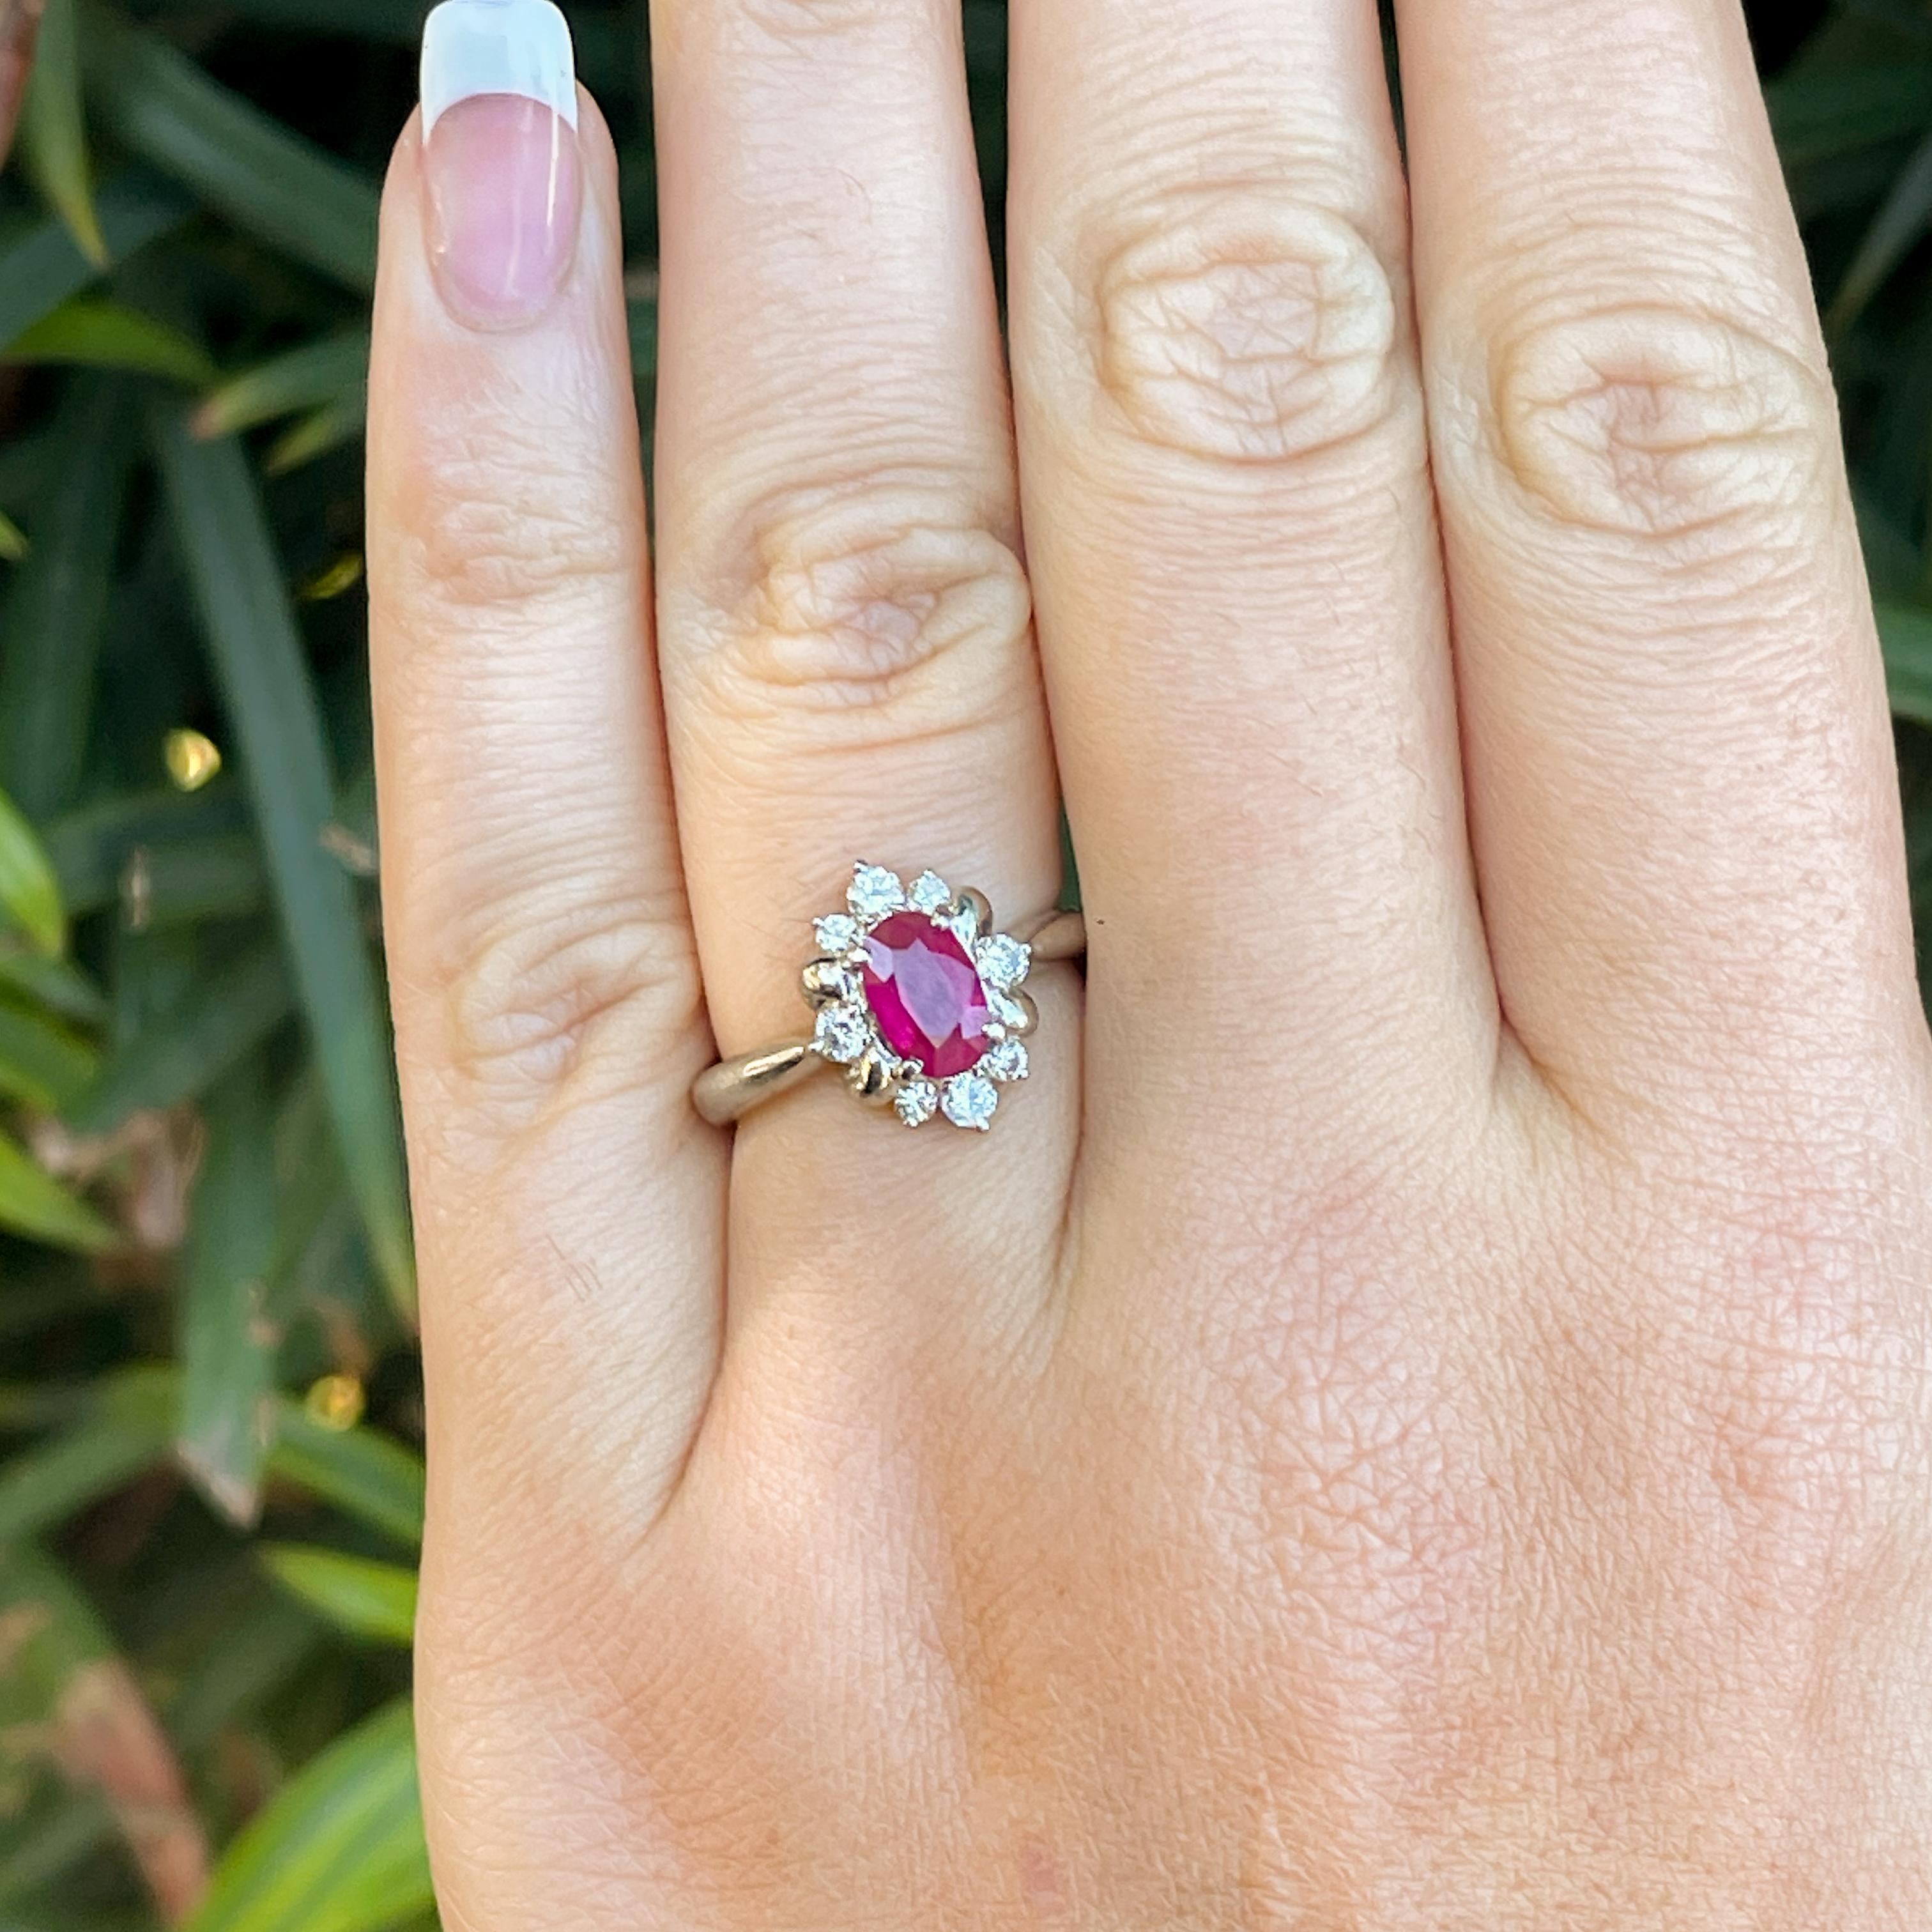 
• 1.28 Carat Very Fine Ruby
• 0.30 Carat Diamonds D Color VS Clarity
• Platinum Band
• Size 5.75, Complimentary Resizing
